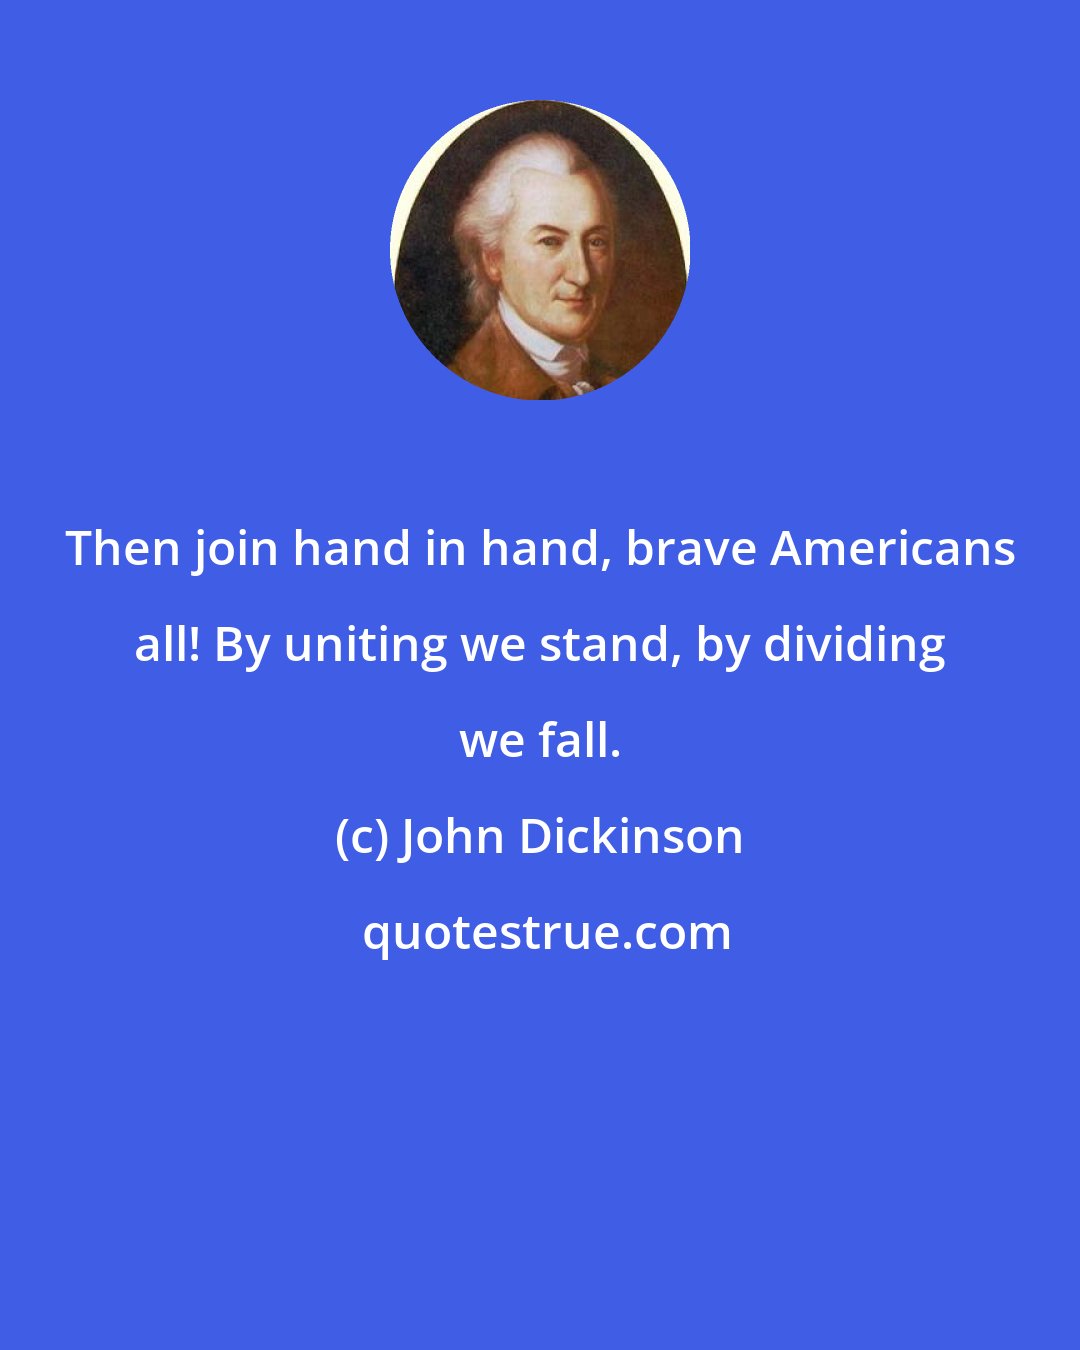 John Dickinson: Then join hand in hand, brave Americans all! By uniting we stand, by dividing we fall.